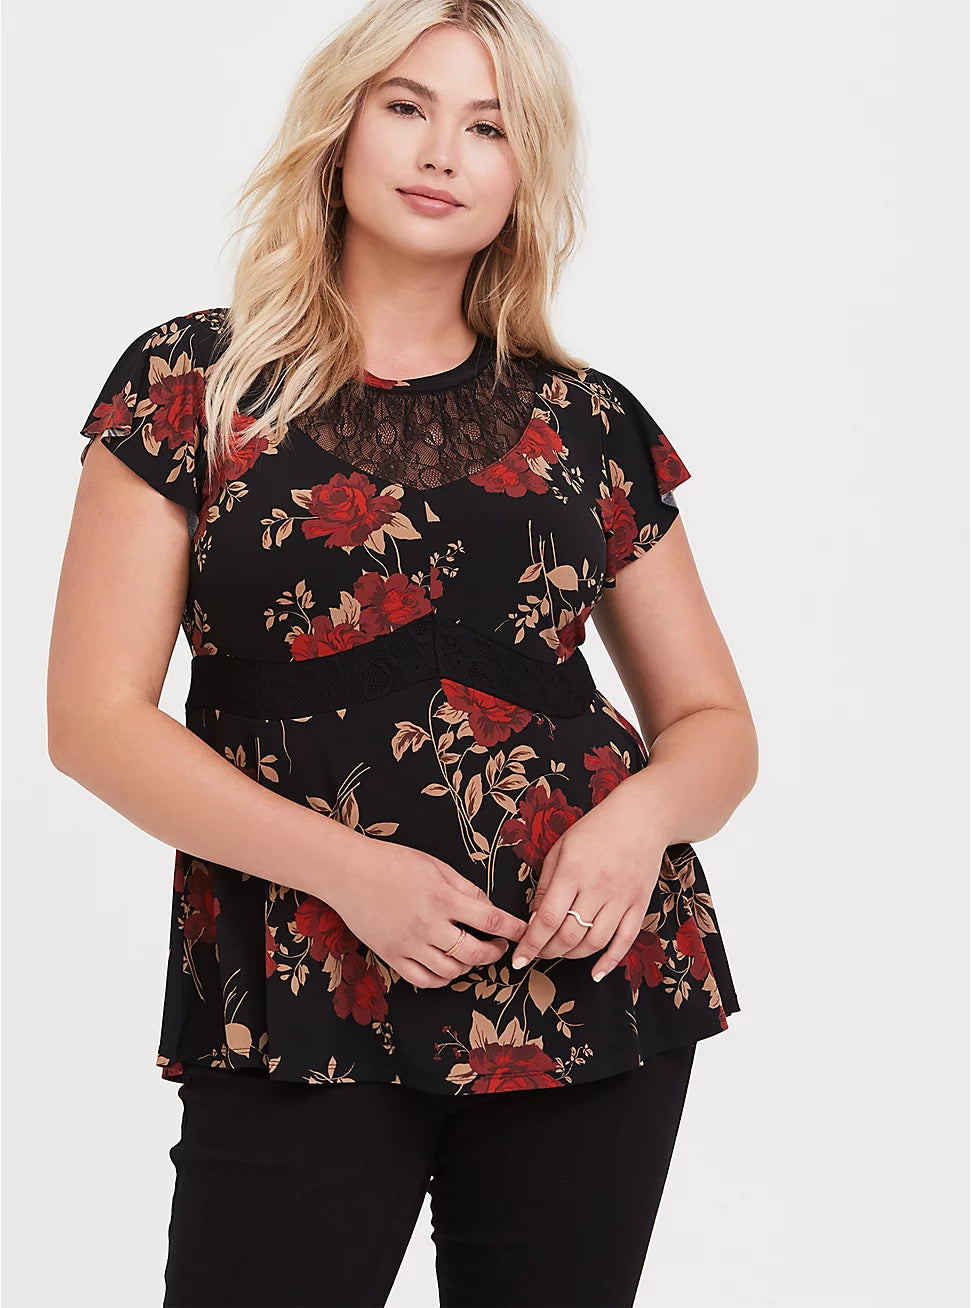 Size 5x Black and Red Floral Studio Knit Lace Peplum Top